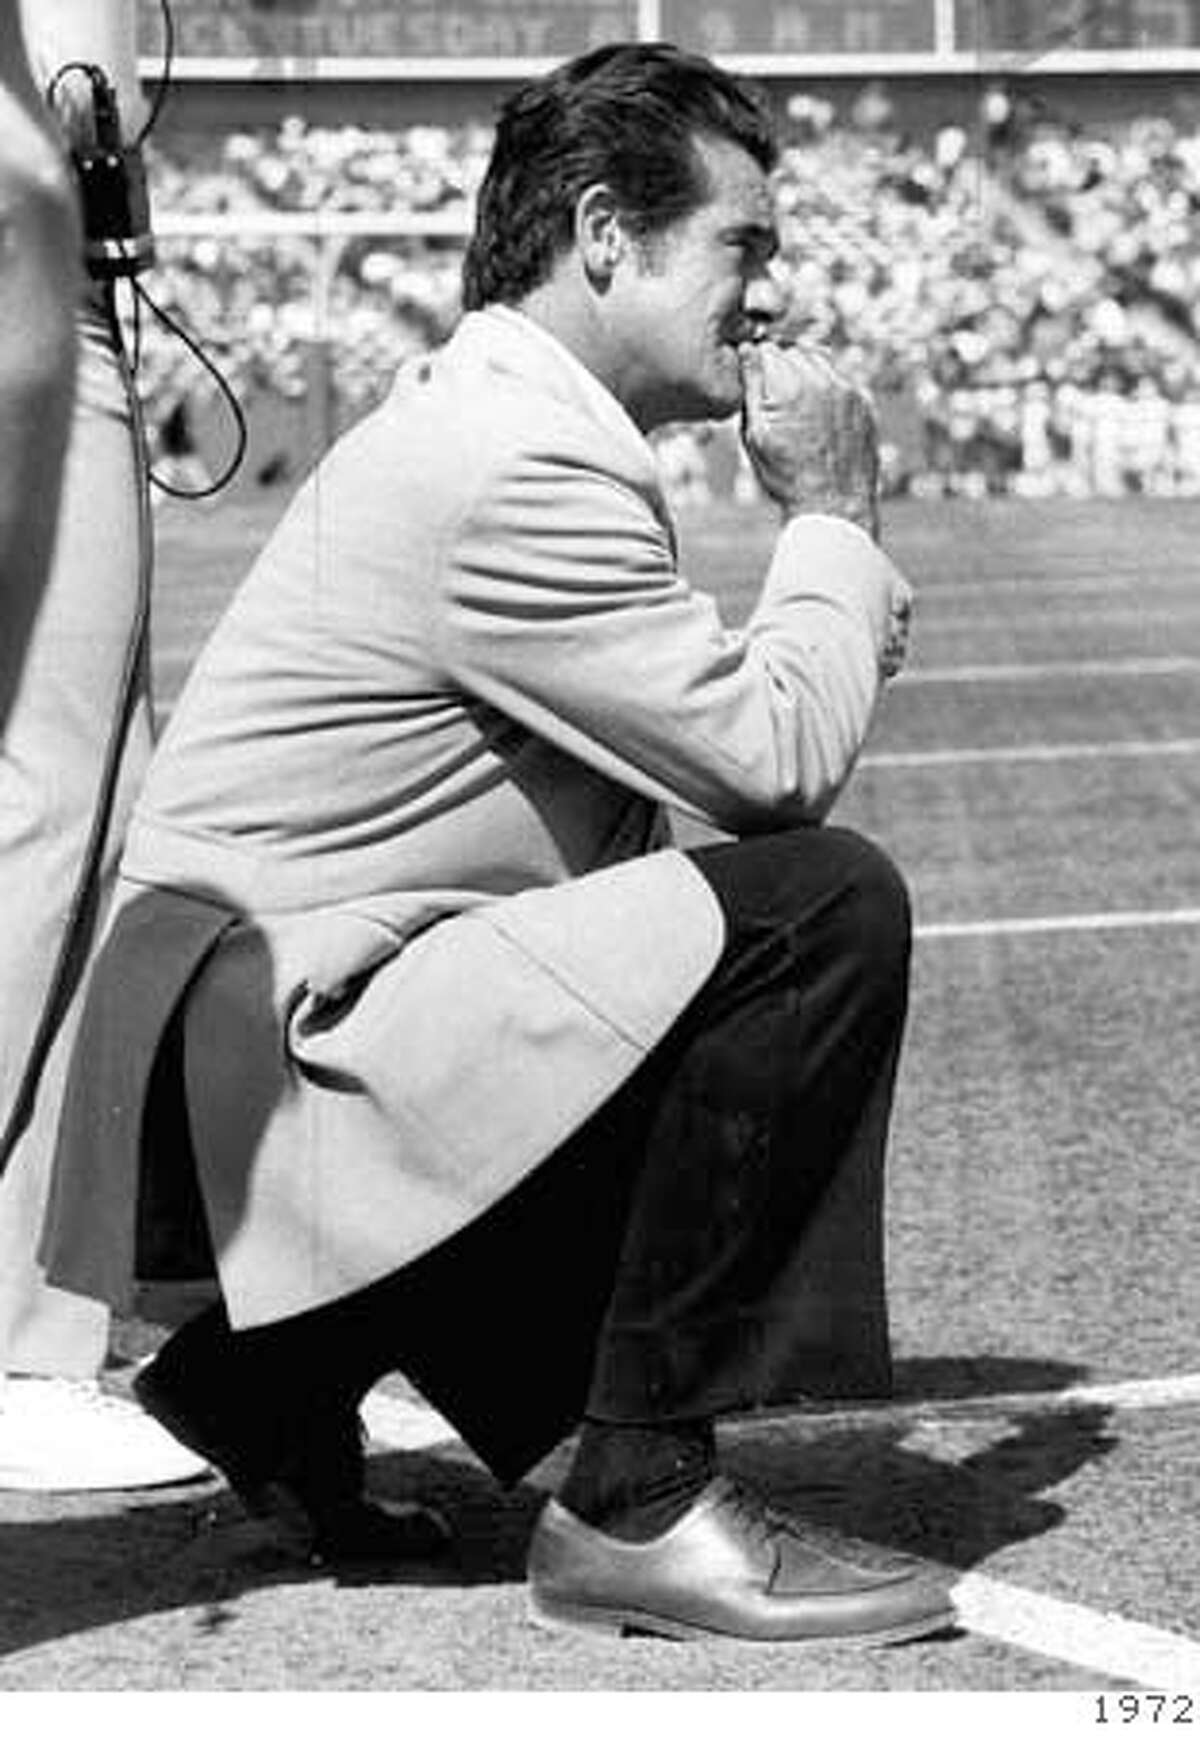 Dick Nolan 49ers coach Sept. 17, 1972 Ran on: 11-20-2006 Mike Nolan, in a tribute to a previous era of NFL coaches, donned a suit and tie as he guided the 49ers to victory over the Seahawks on Sunday. Ran on: 11-20-2006 Mike Nolan, in a tribute to a previous era of NFL coaches, donned a suit and tie as he guided the 49ers to victory over the Seahawks on Sunday.